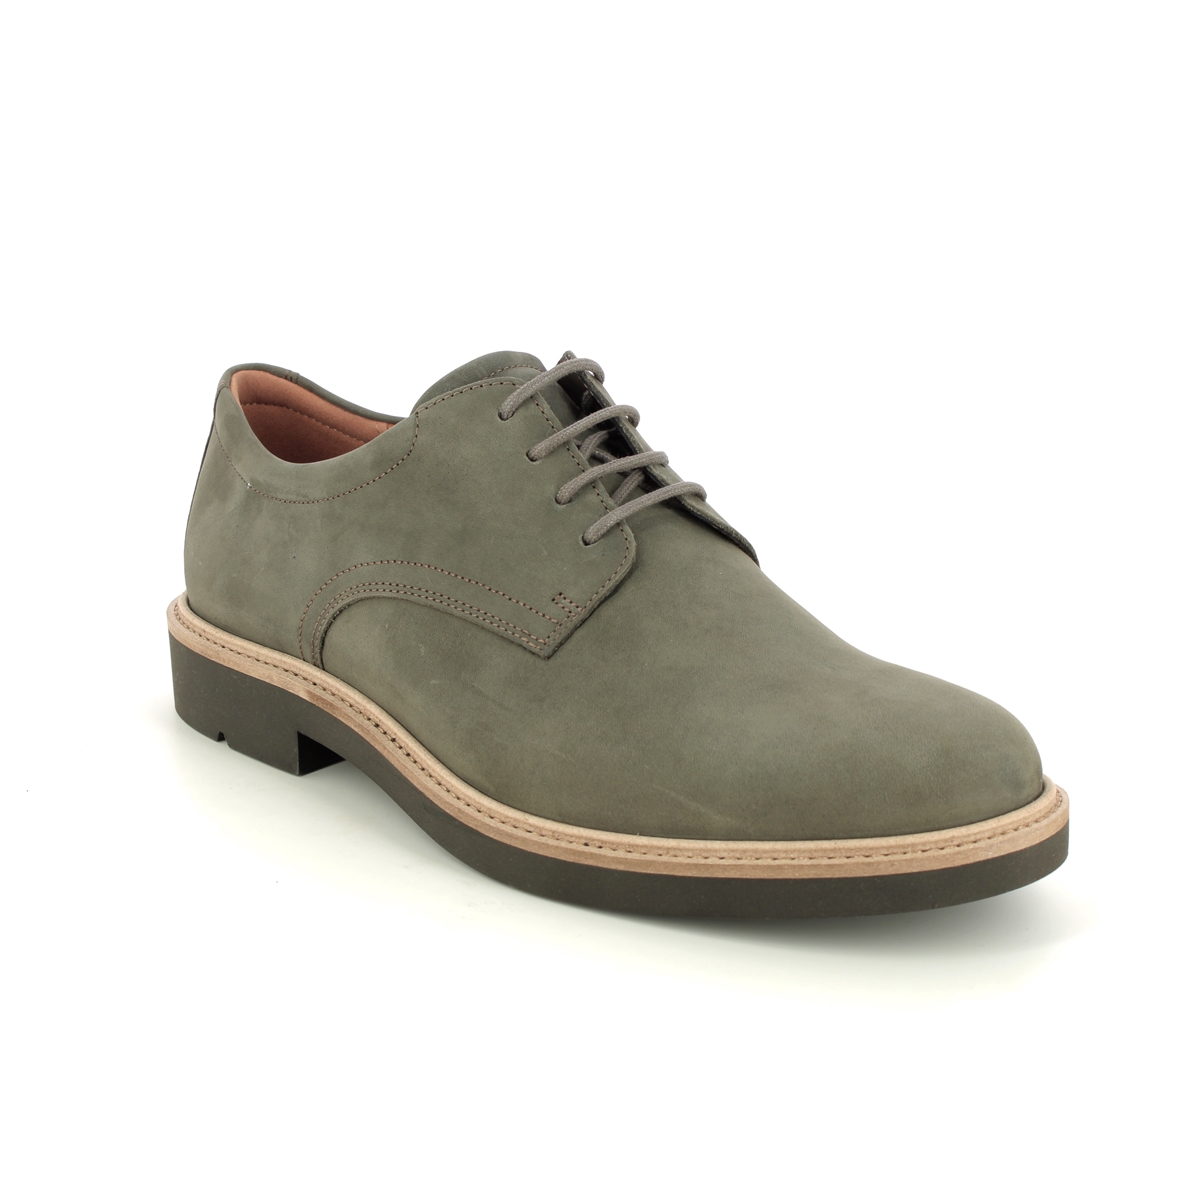 ECCO London Metropole Grey nubuck Mens formal shoes 525604-02559 in a Plain Leather in Size 45